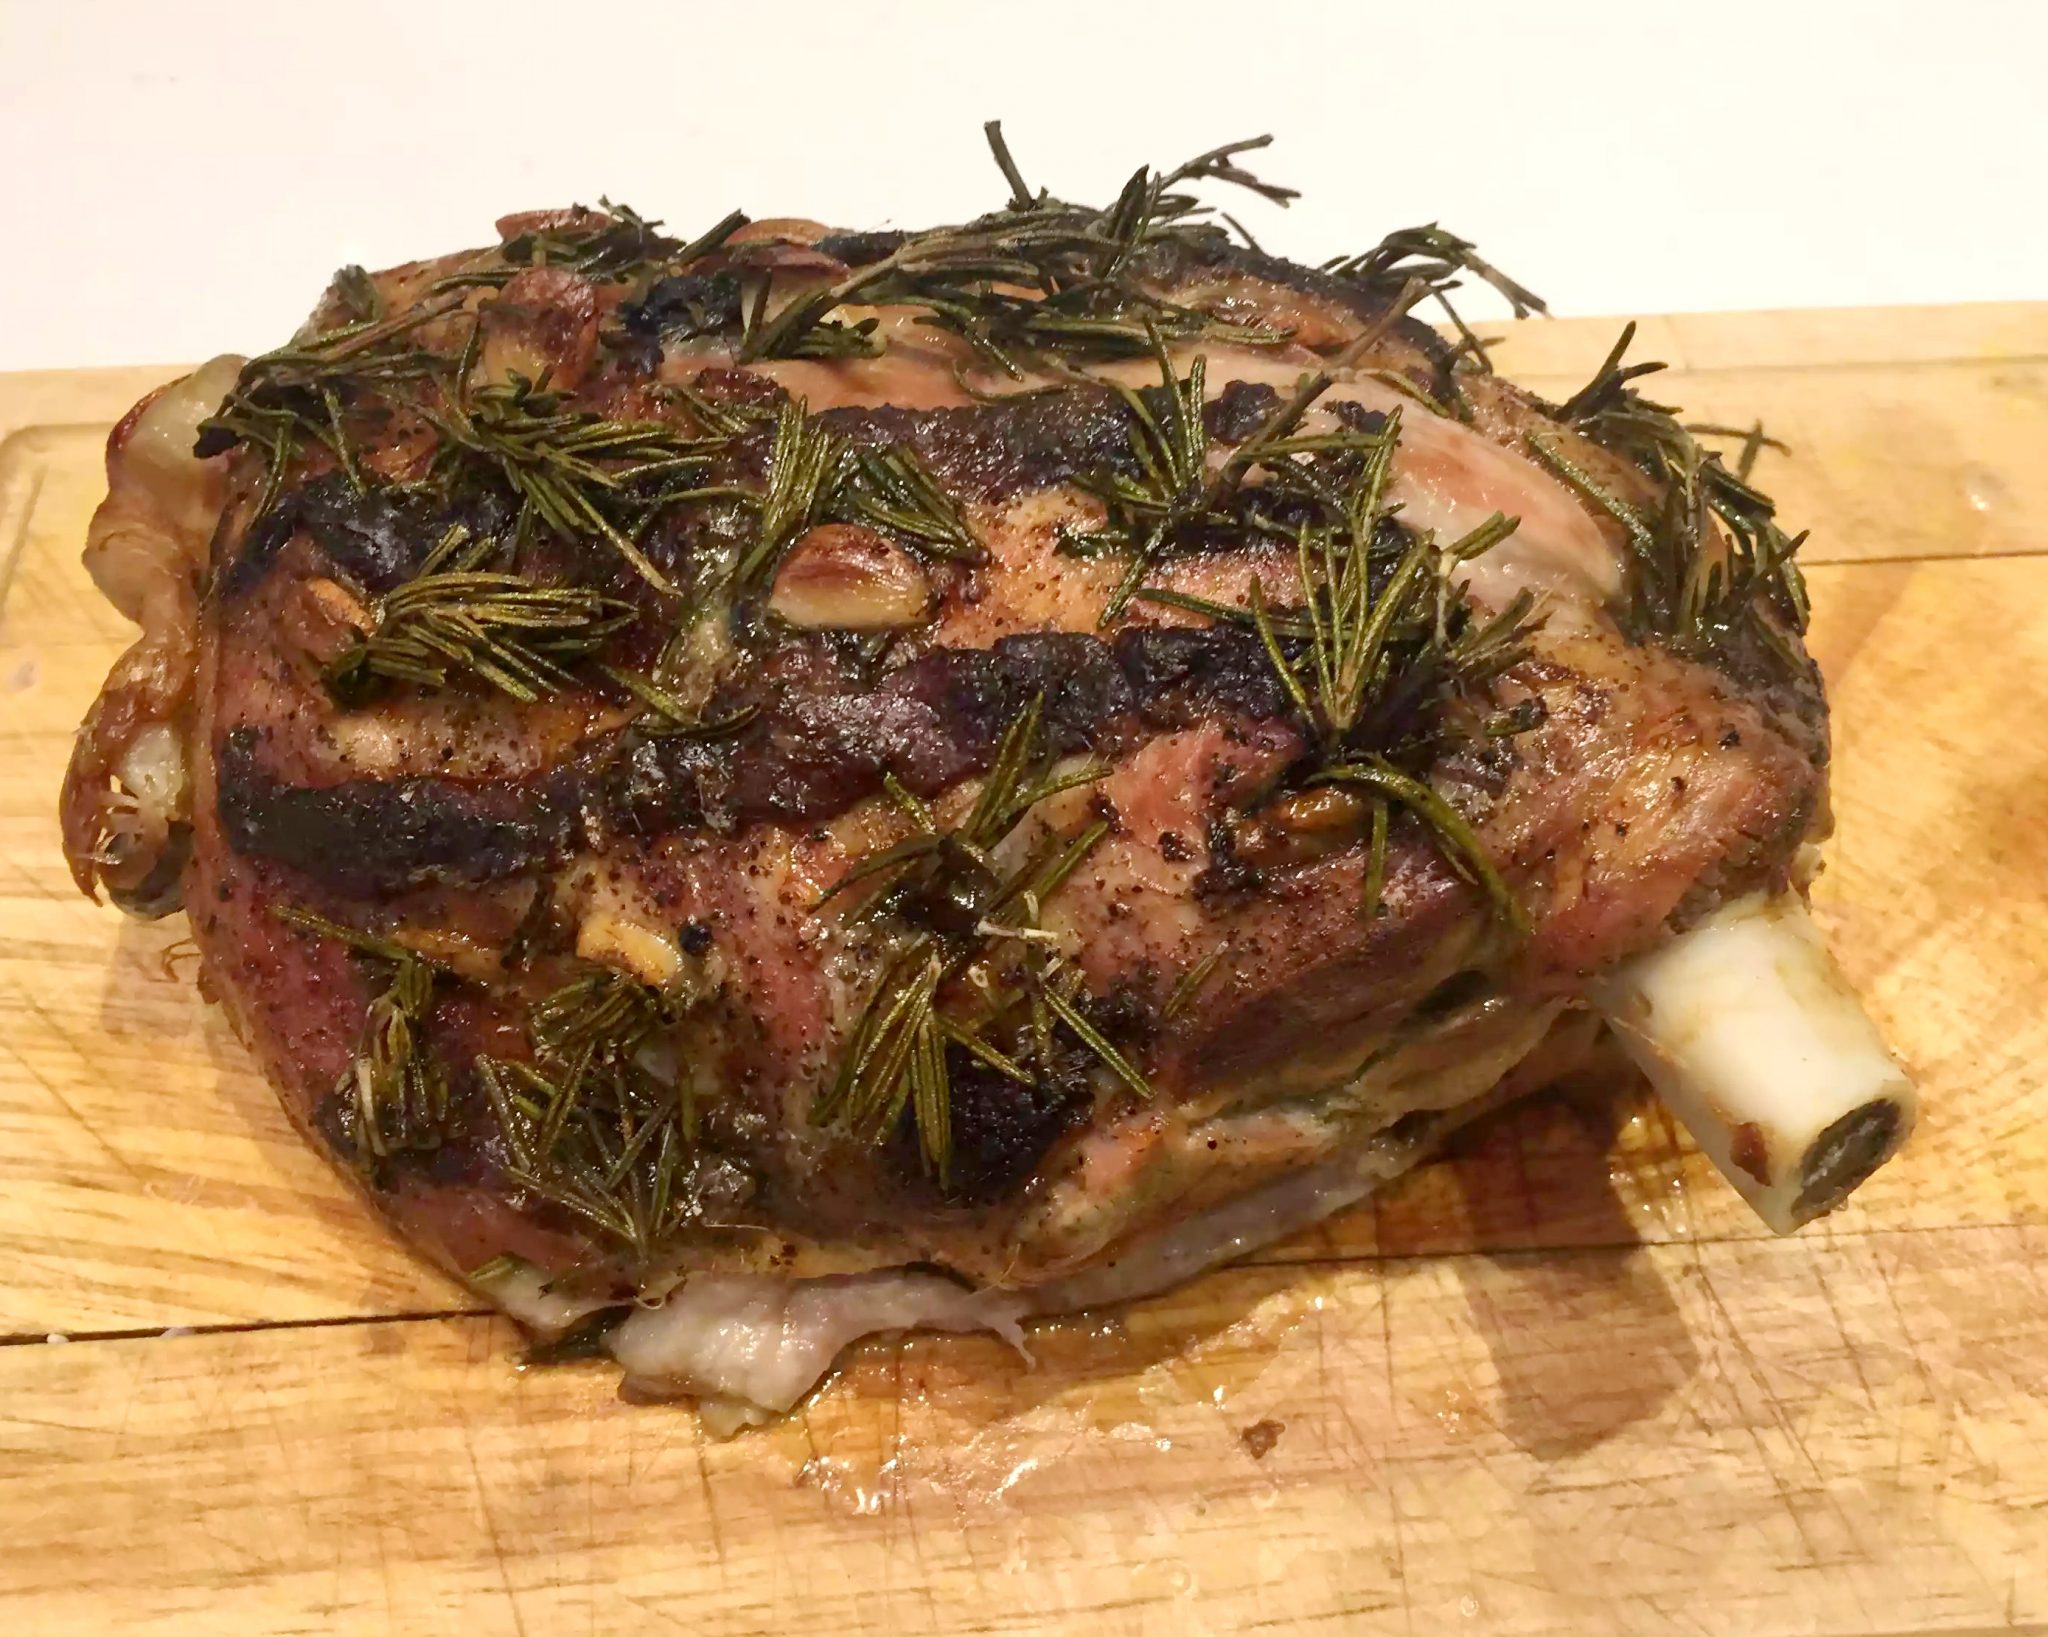 Slow Roasted Lamb Shoulder by Emma Eats & Explores - SCD, Paleo, Grainfree, Glutenfree, Dairyfree, Sugarfree, Primal, Whole30, Low Carb, LCHF